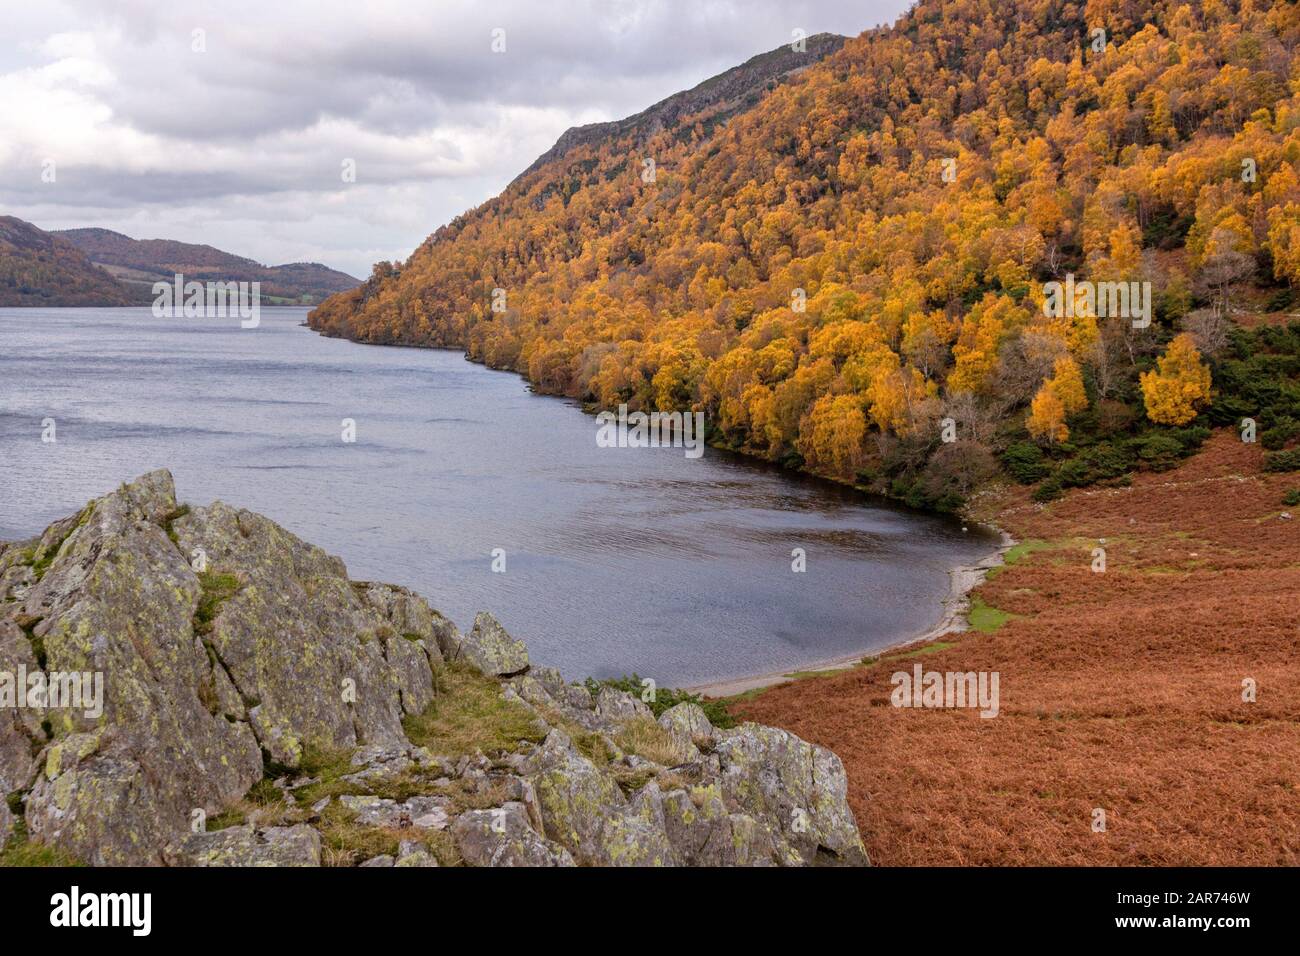 Silver birch trees with bright yellow leaves giving stunning Autumn colour along the shores of Ullswater in the English Lake District, November, UK Stock Photo